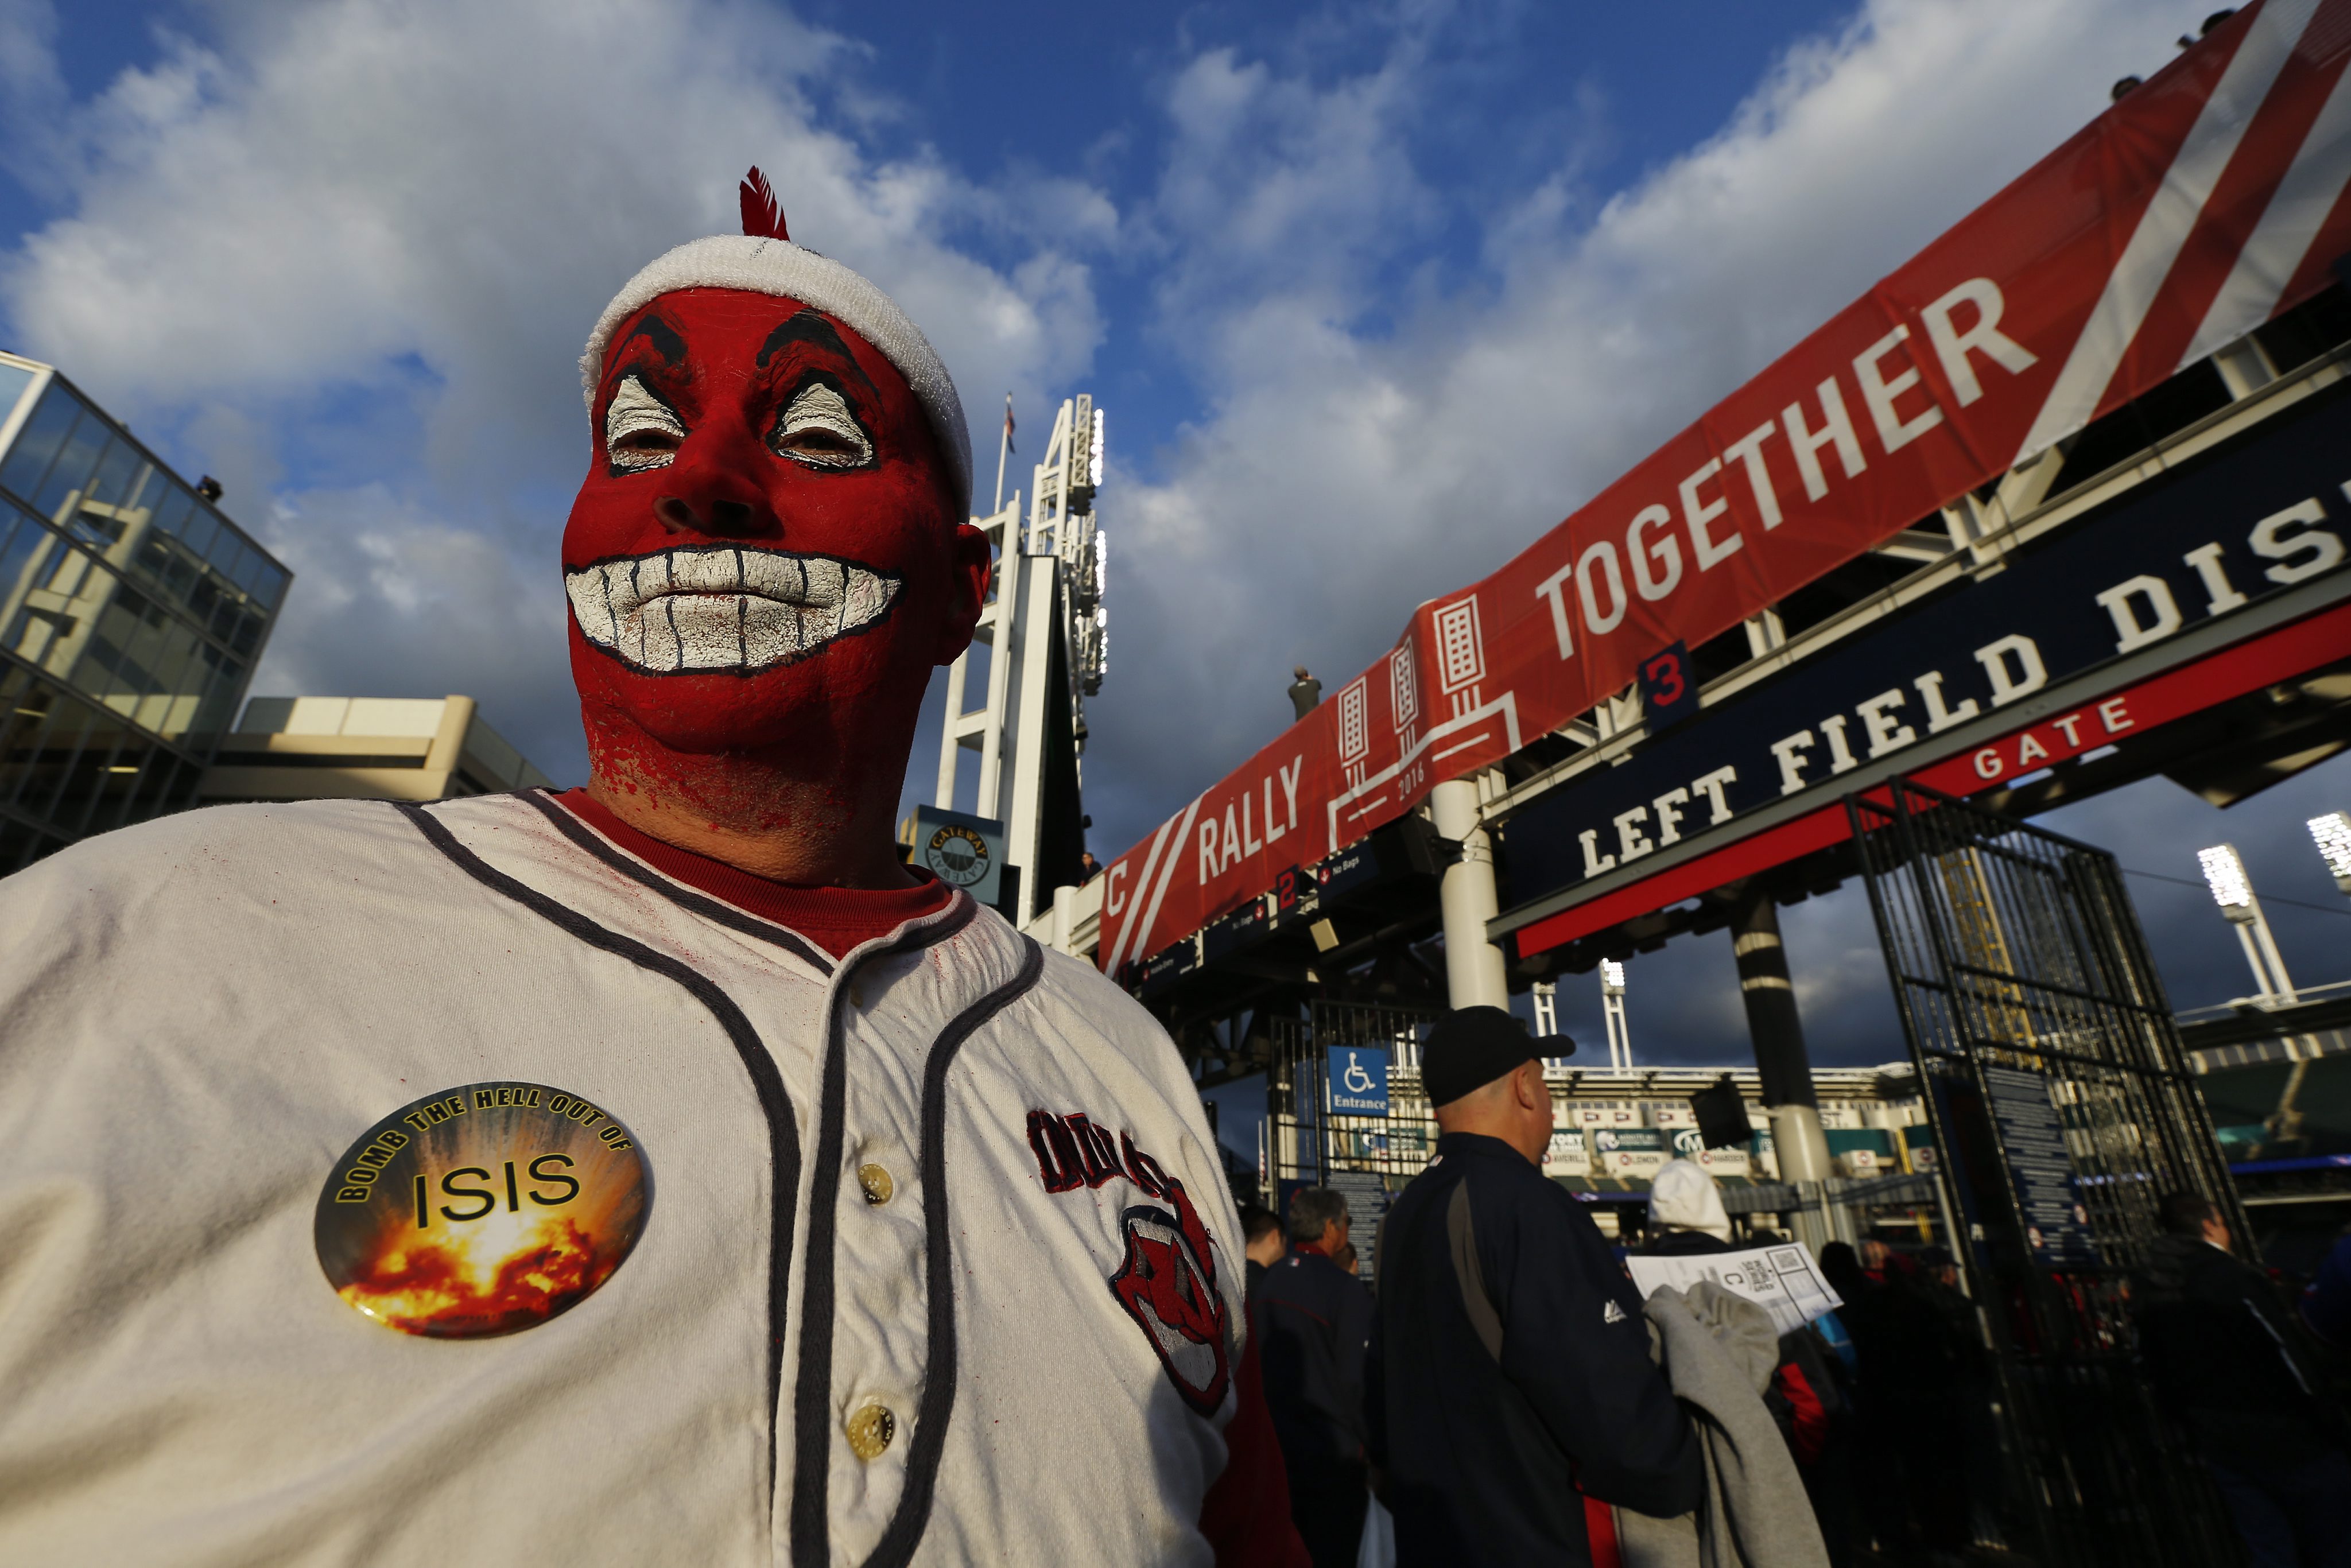 epa05602923 A Cleveland Indians fan outside before the gates opened for game one of the World Series between the Chicago Cubs and the Cleveland Indians at Progressive Field in Cleveland, Ohio, USA, 25 October 2016. The best-of-seven series will be played with games first in Cleveland, then Chicago and back to Cleveland if necessary. EPA/JOHN G. MABANGLO ORG XMIT: MCX019